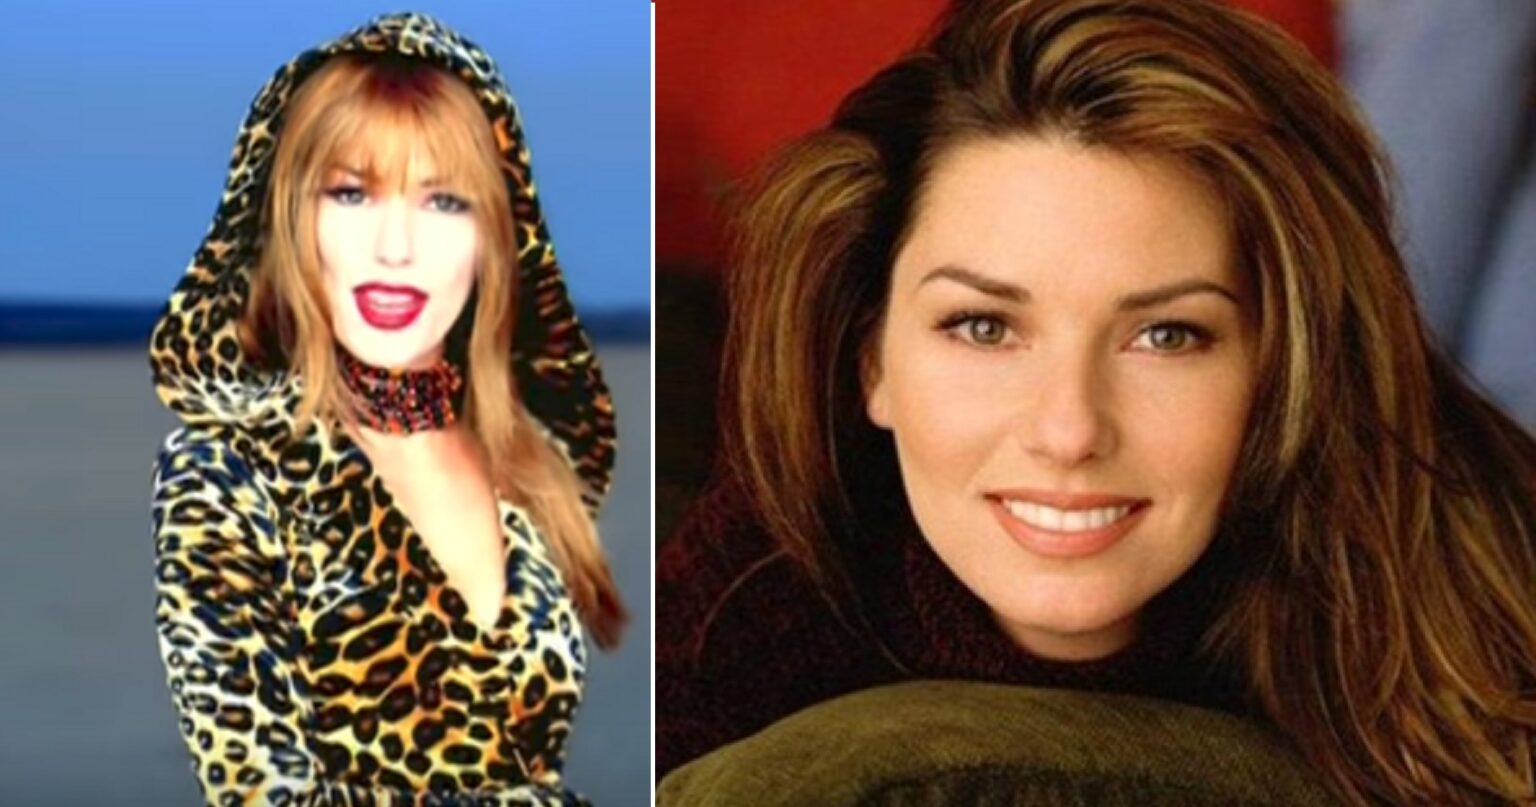 The Top 10 Best Songs Of Shania Twain The Timeless Queen of Country/Pop